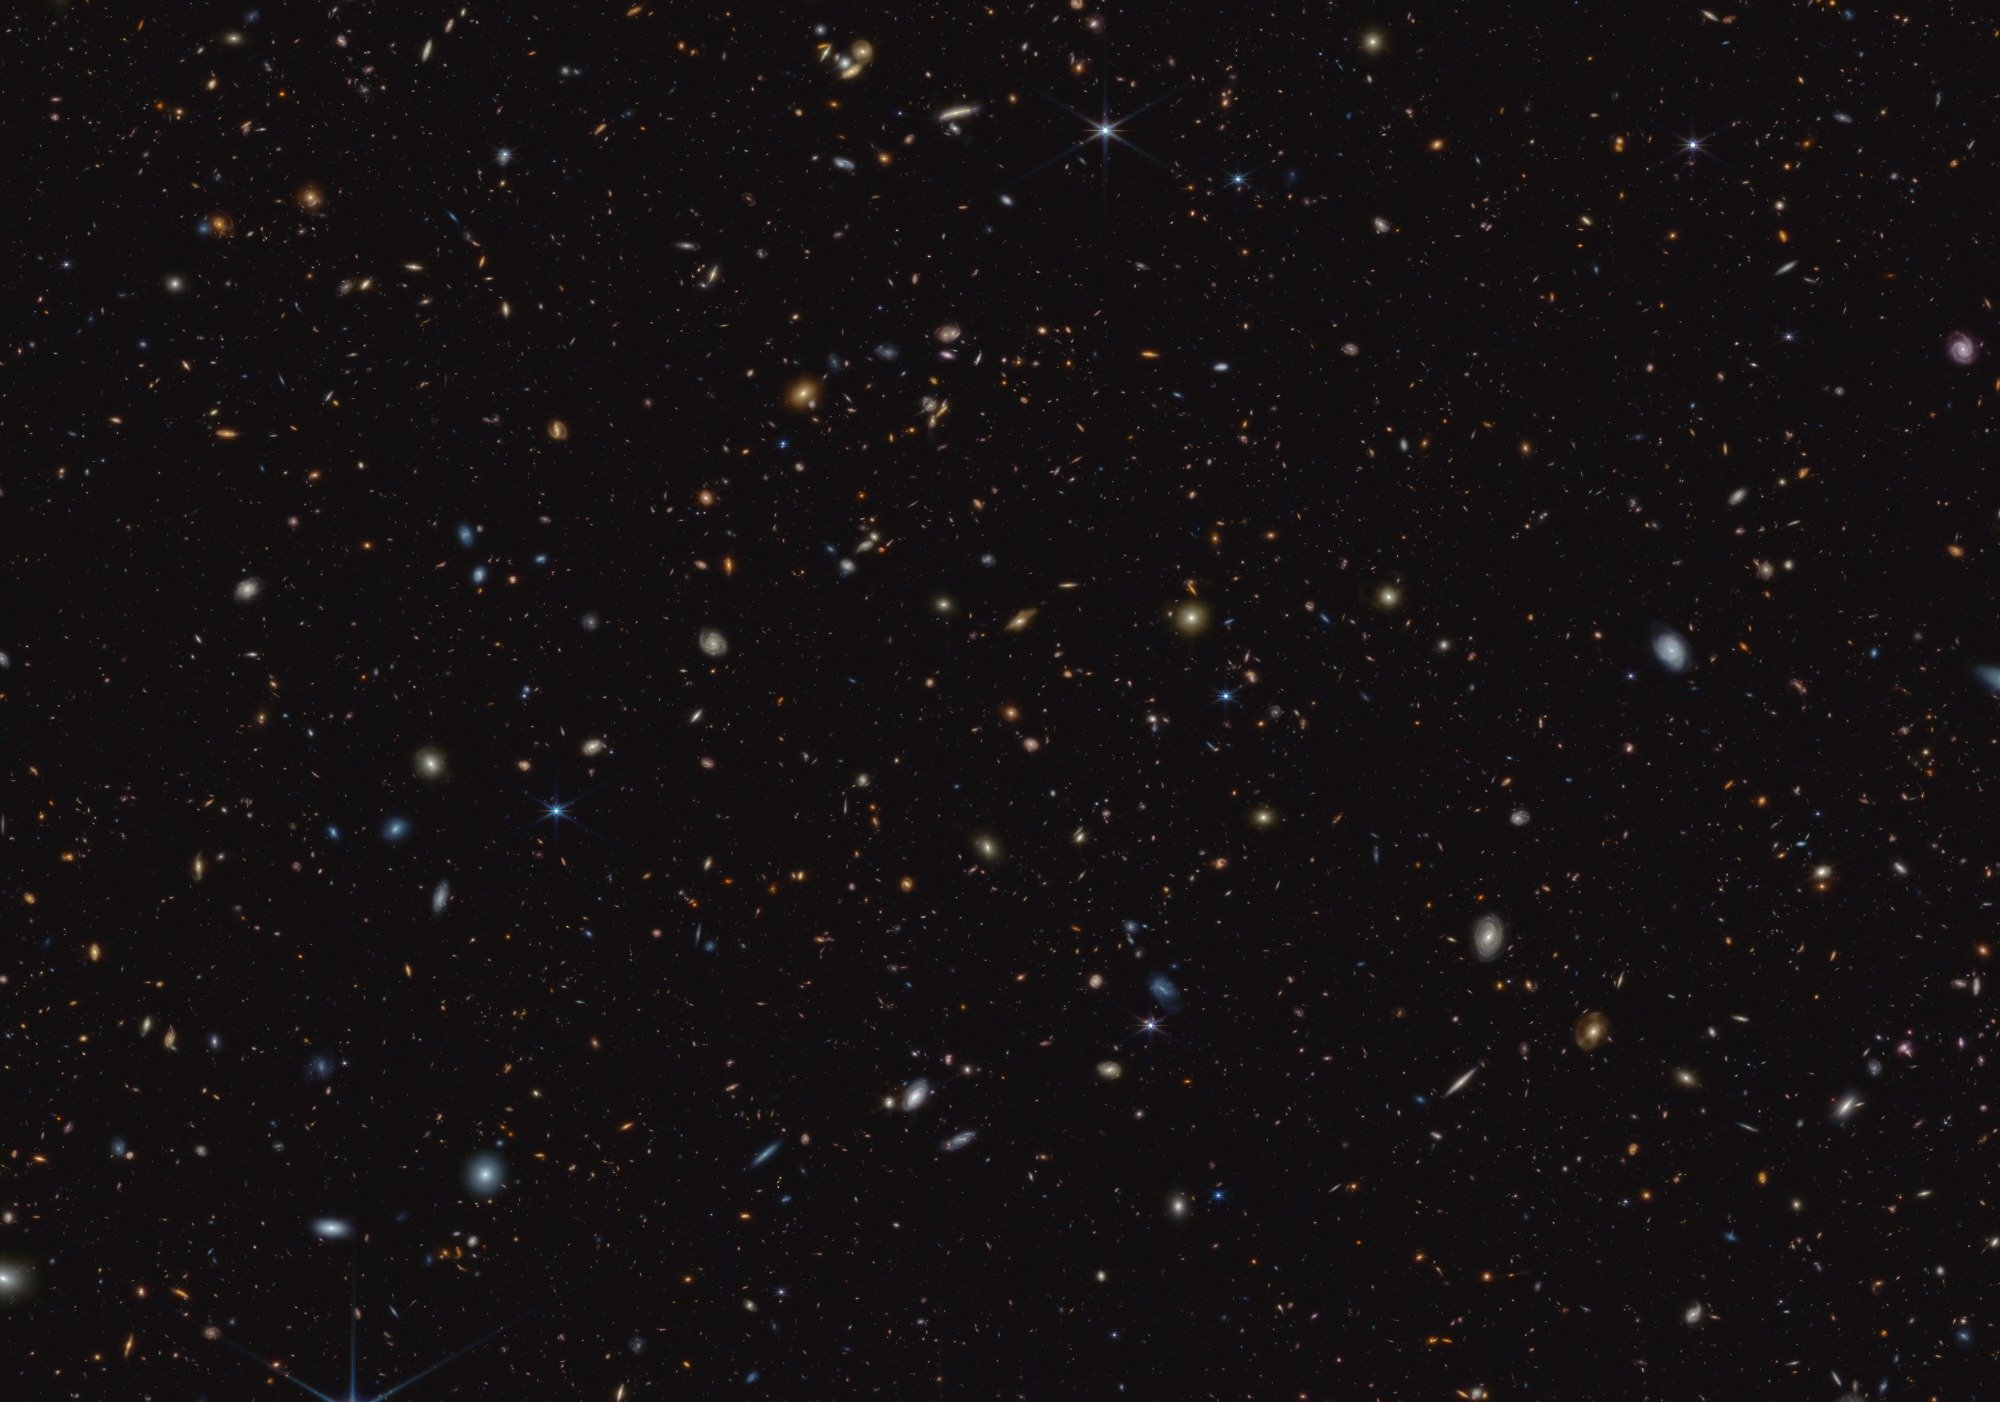 The James Webb Telescope captured more than 45,000 galaxies in one photo